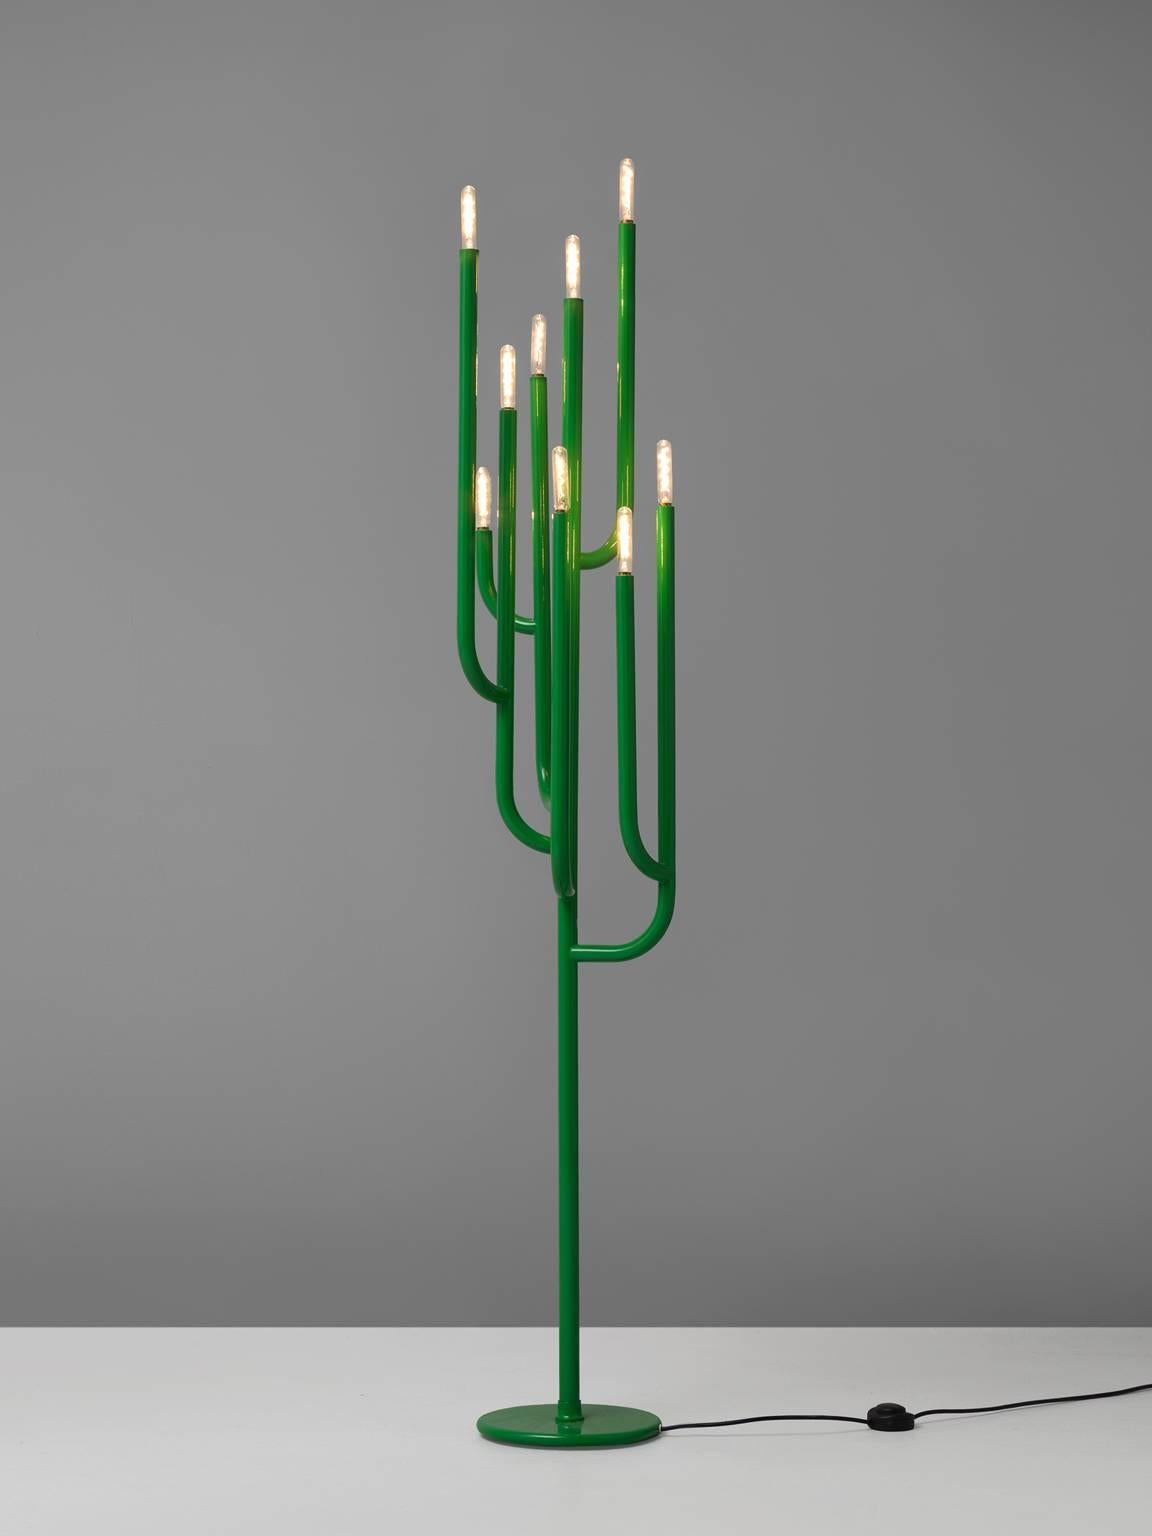 Floor lamp, enameled iron, 1960s, Italy.

Originating in Italy, this Mid-Century Modern, nine-light floor lamp, was designed by Florence Casey in the 1960s. A green enamelled iron tube issues four arms, each extending into one more arm. The arms